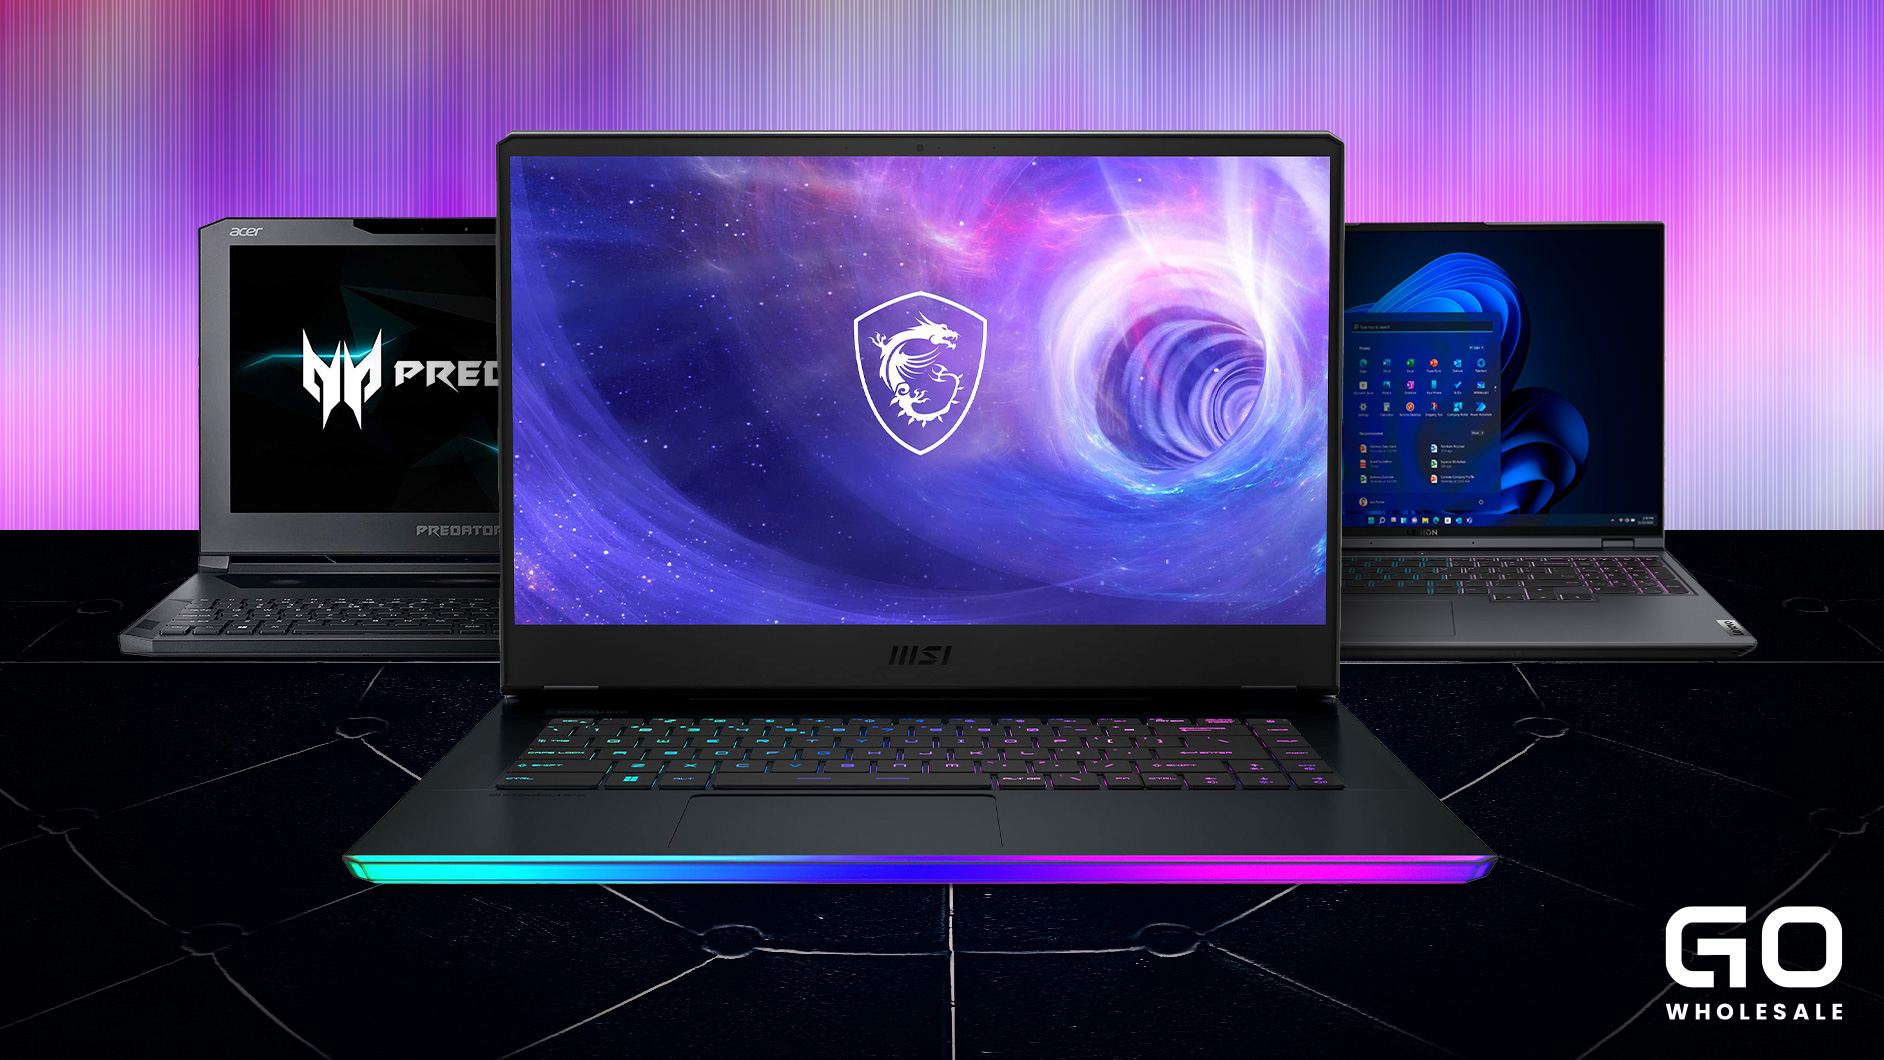 What Are the Best Gaming Laptops to Buy Wholesale to Resell in 2023?